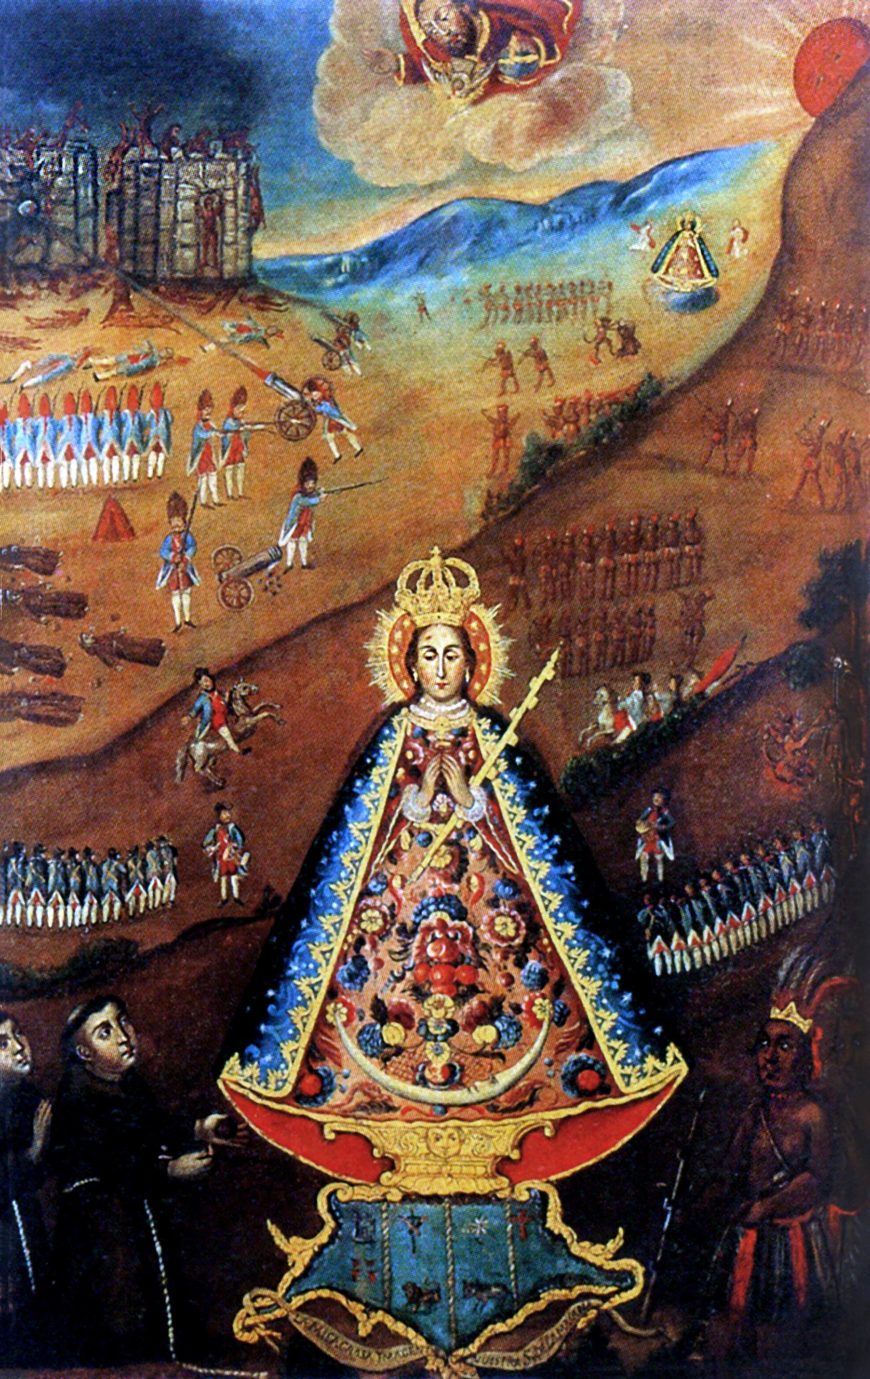 Unknown artist, The Virgin of the Macana, second half of the 18th century, oil on canvas (private collection)